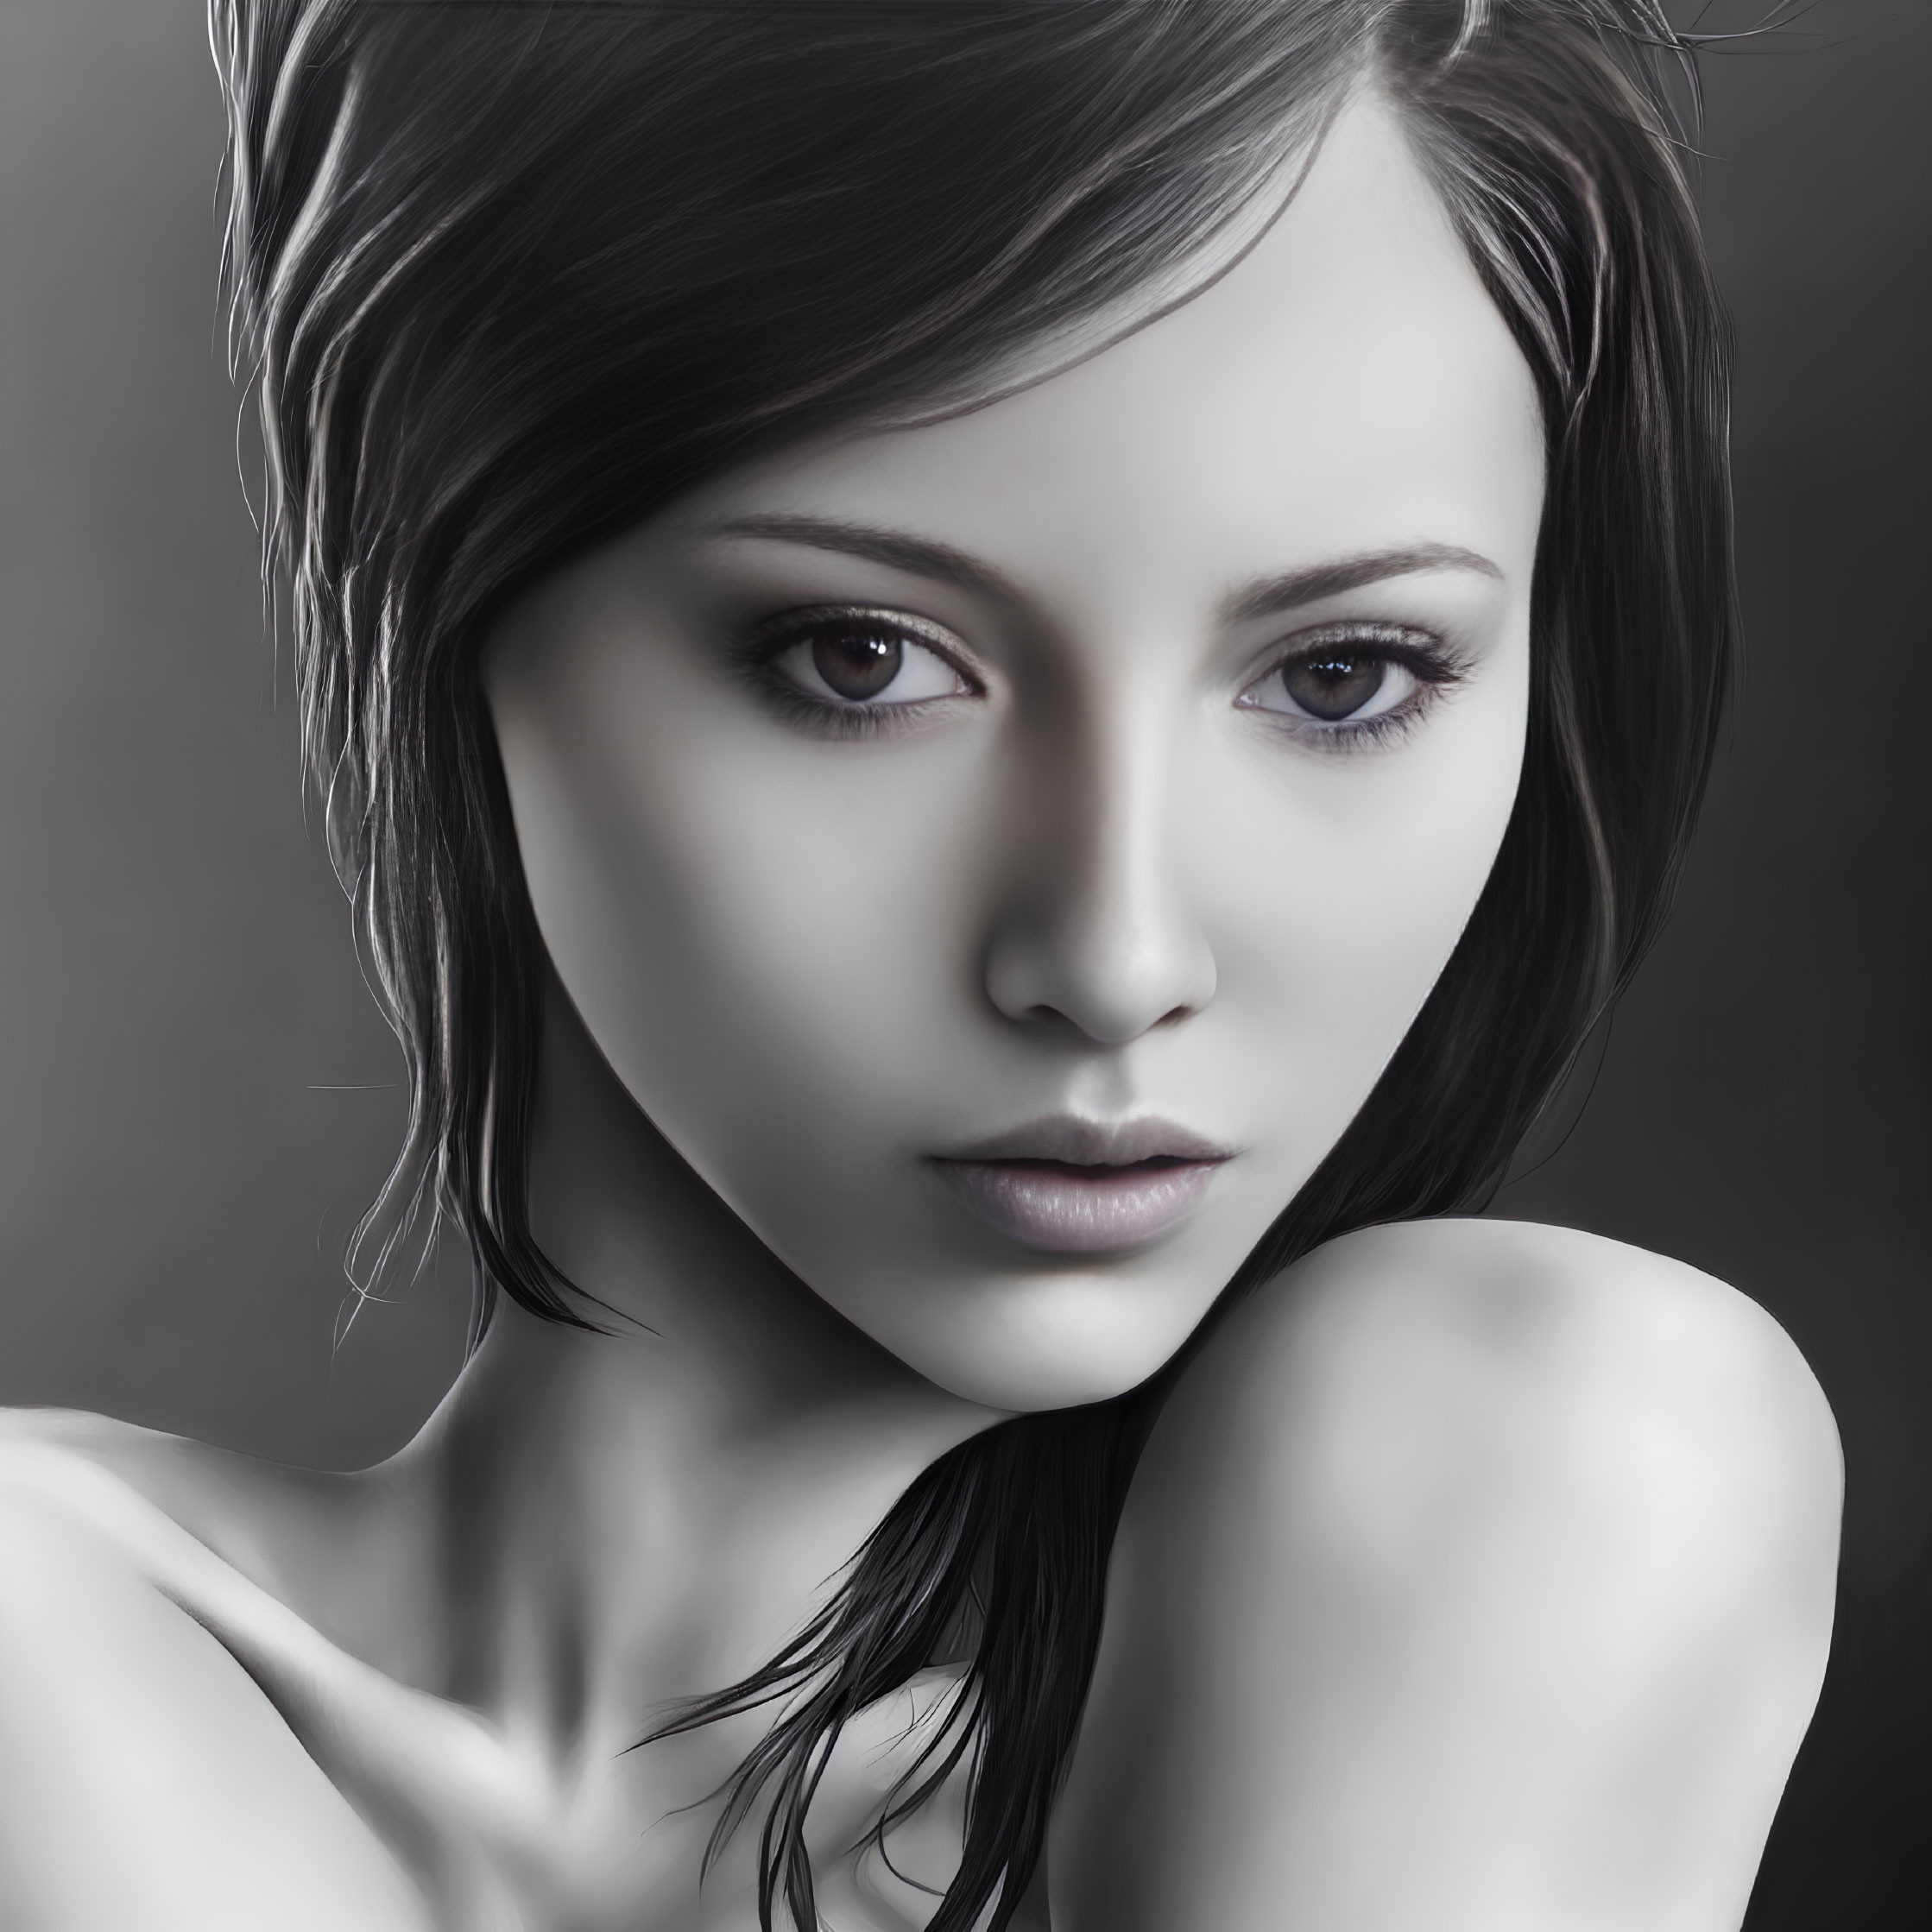 Grayscale digital portrait of woman with dark hair and captivating eyes